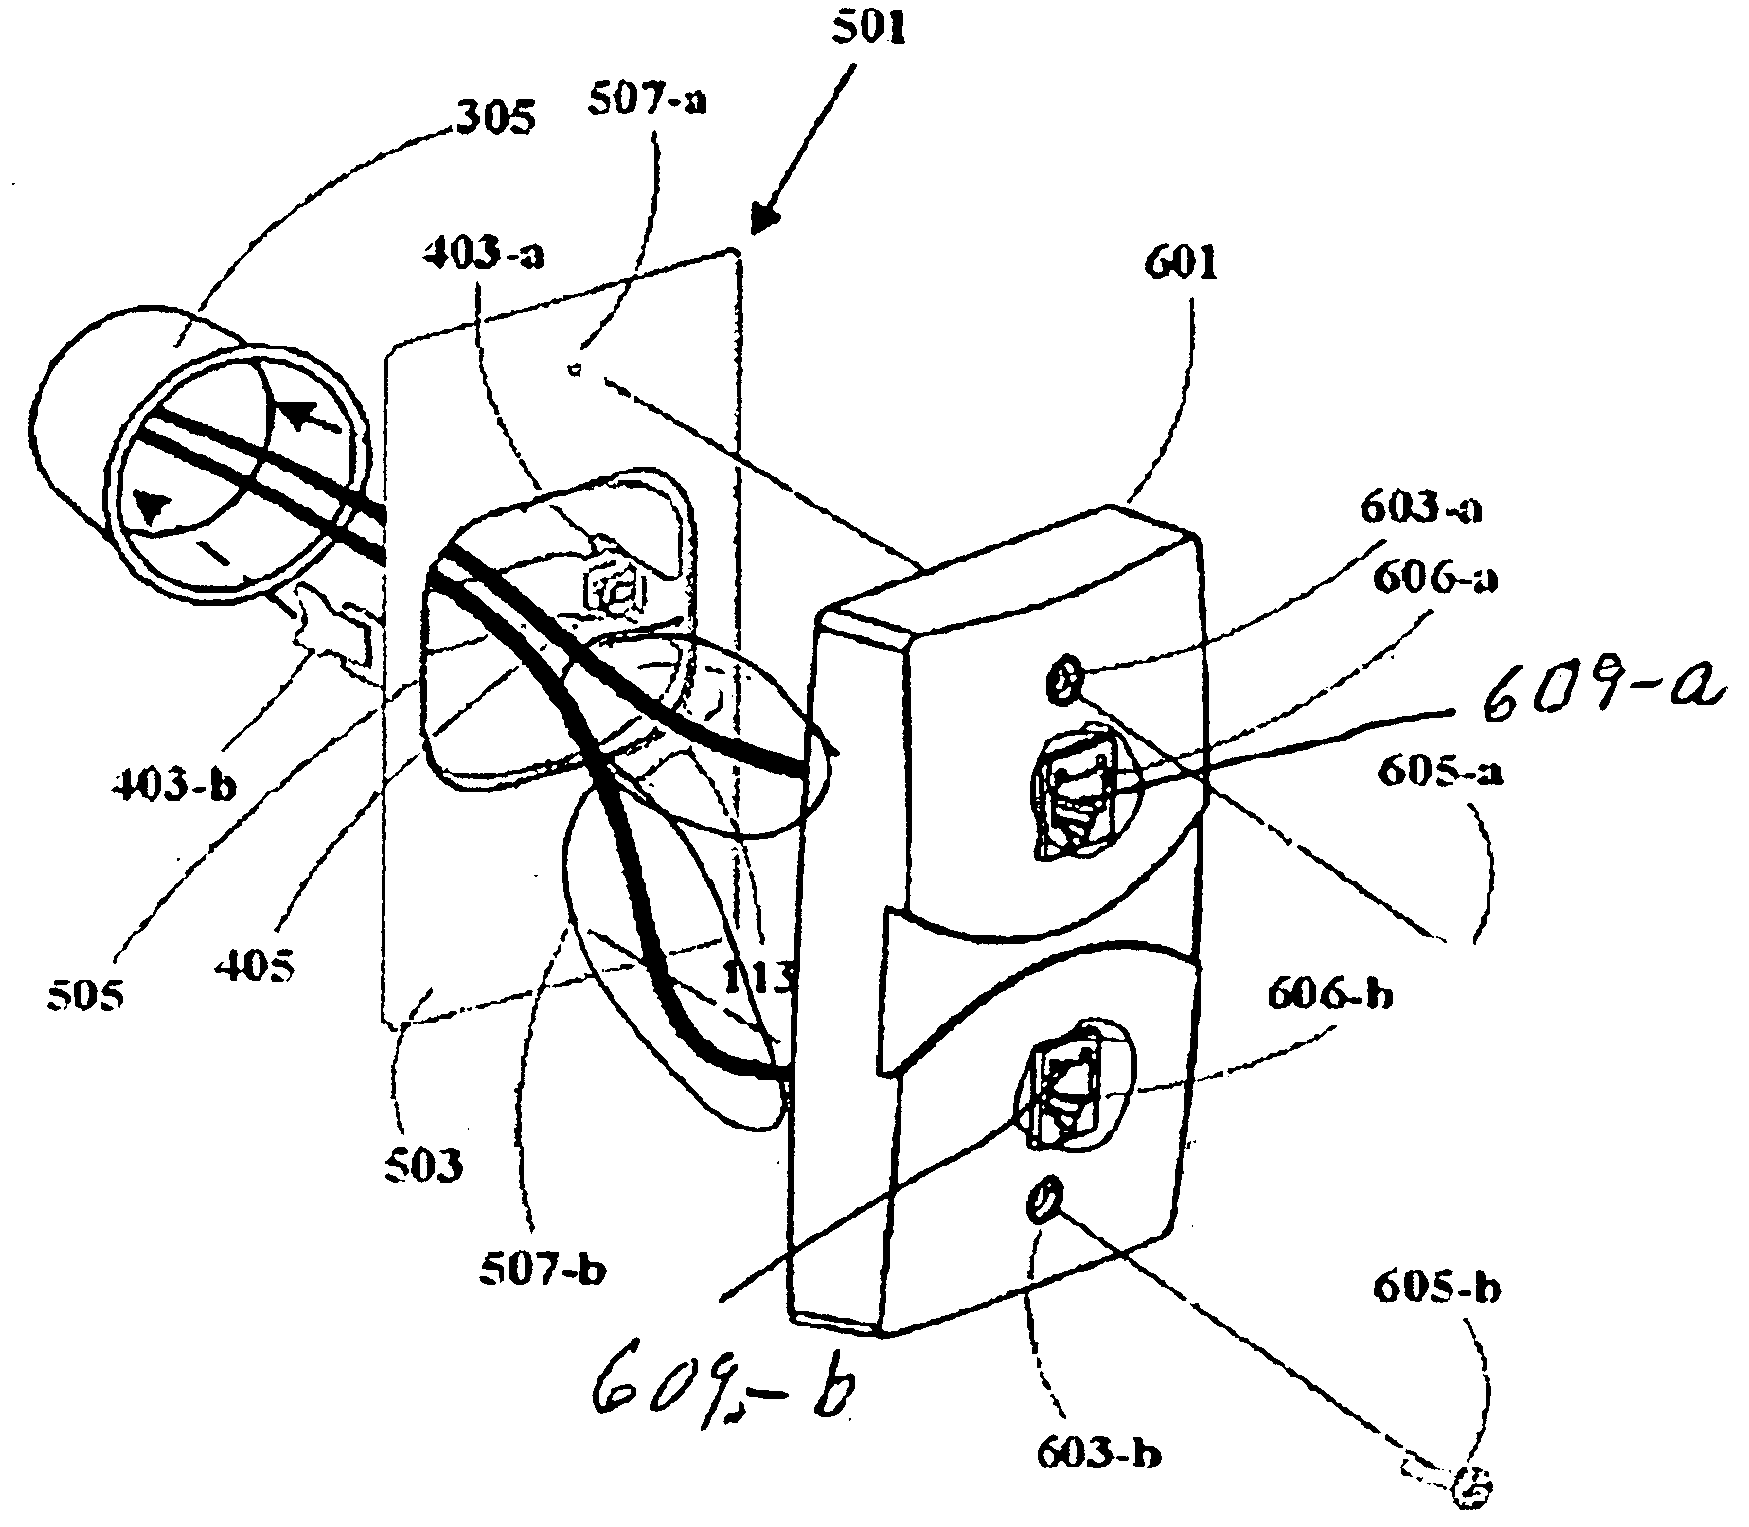 Adapter for mounting a faceplate of a first style on to an electrical outlet cavity of a second style